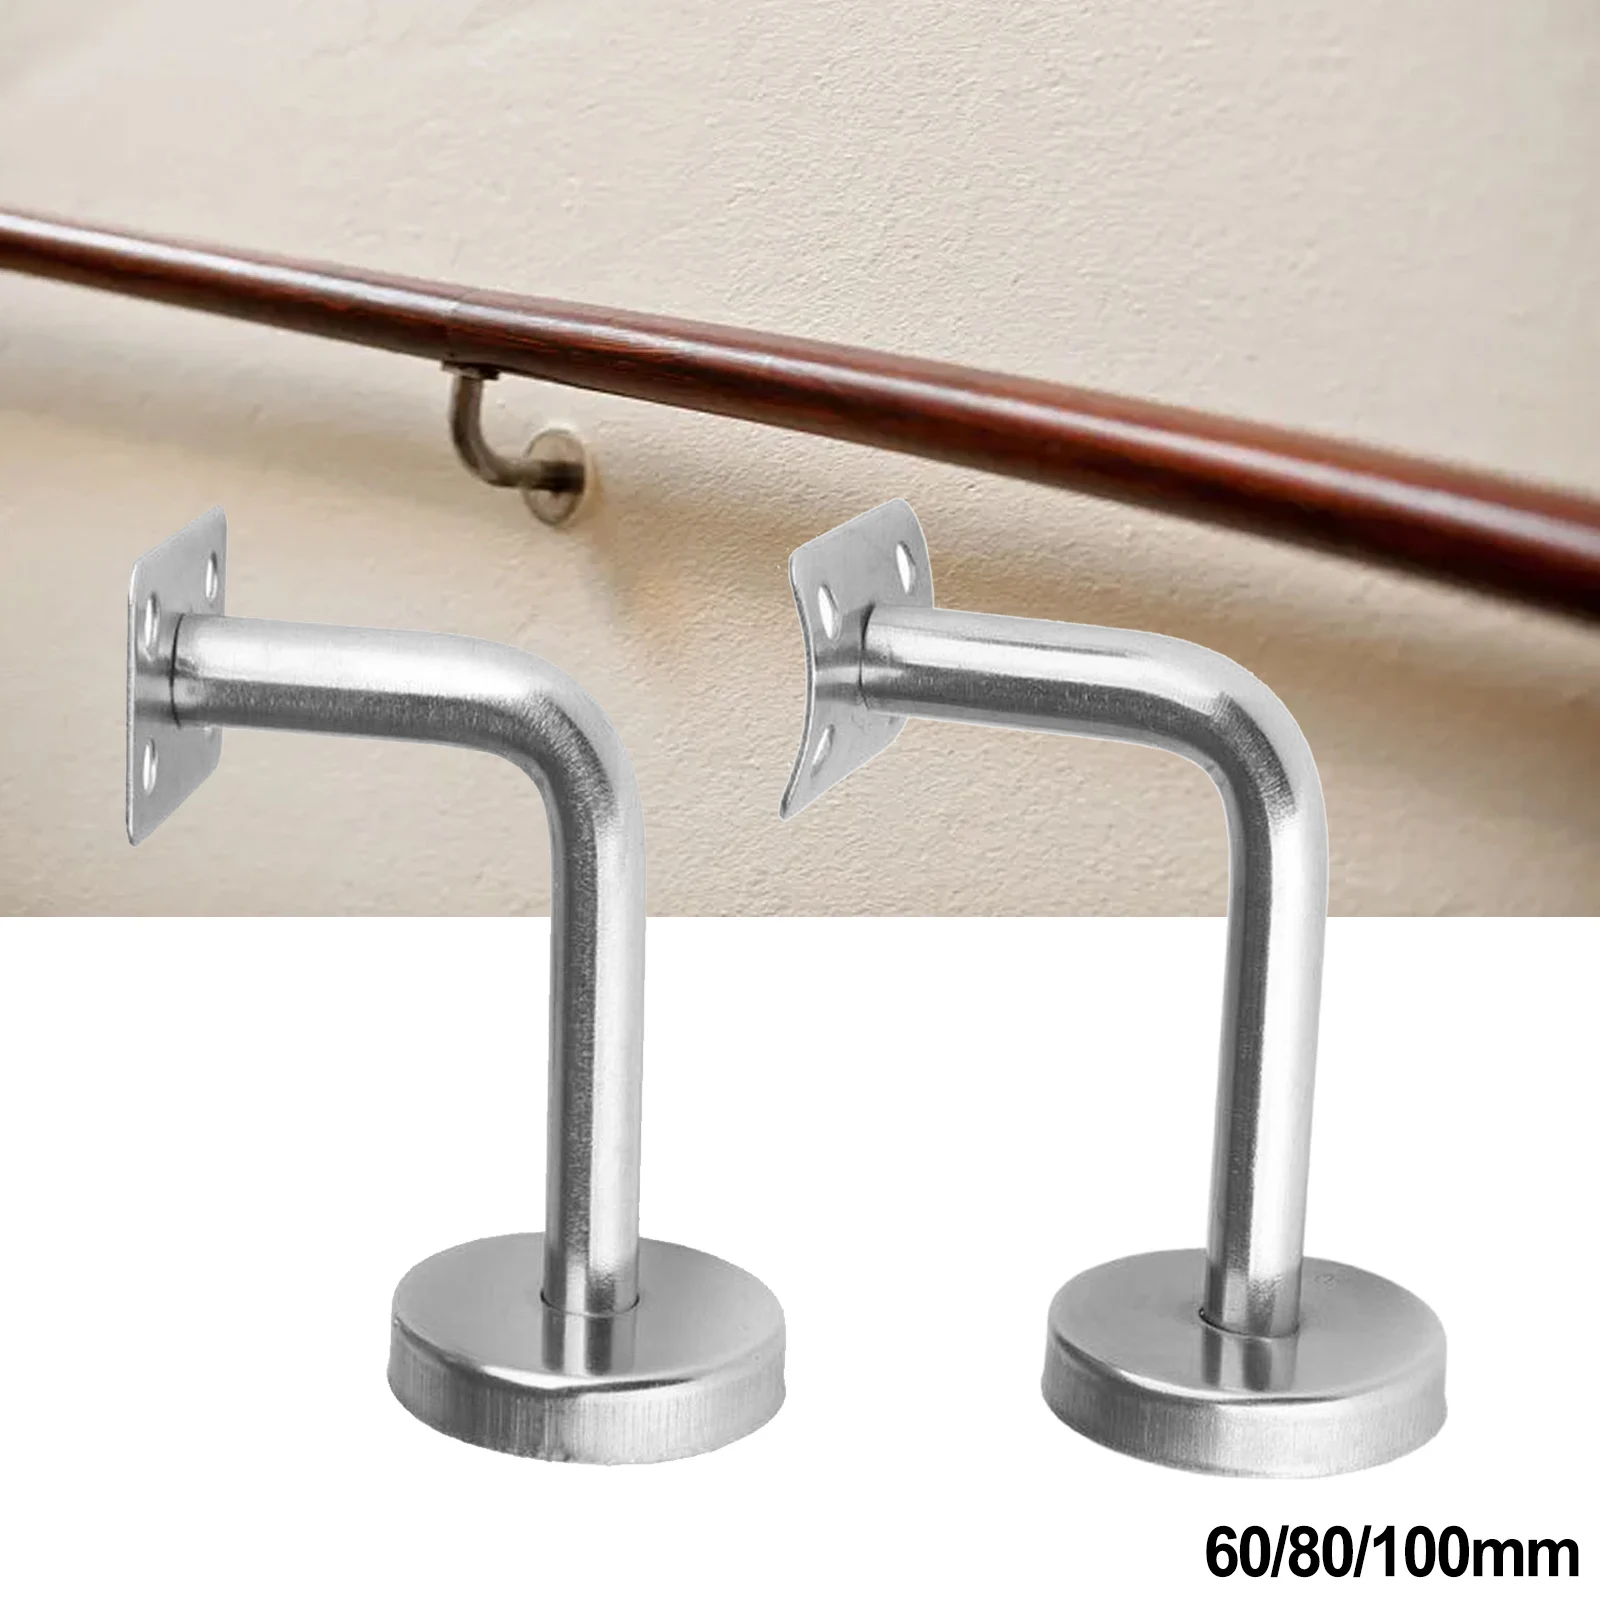 

2pcs Stair Handrail Brackets Stainless Steel Wall Mount Support Ladder Wall Handrail Brackets For Stairs Railing Stairway Access